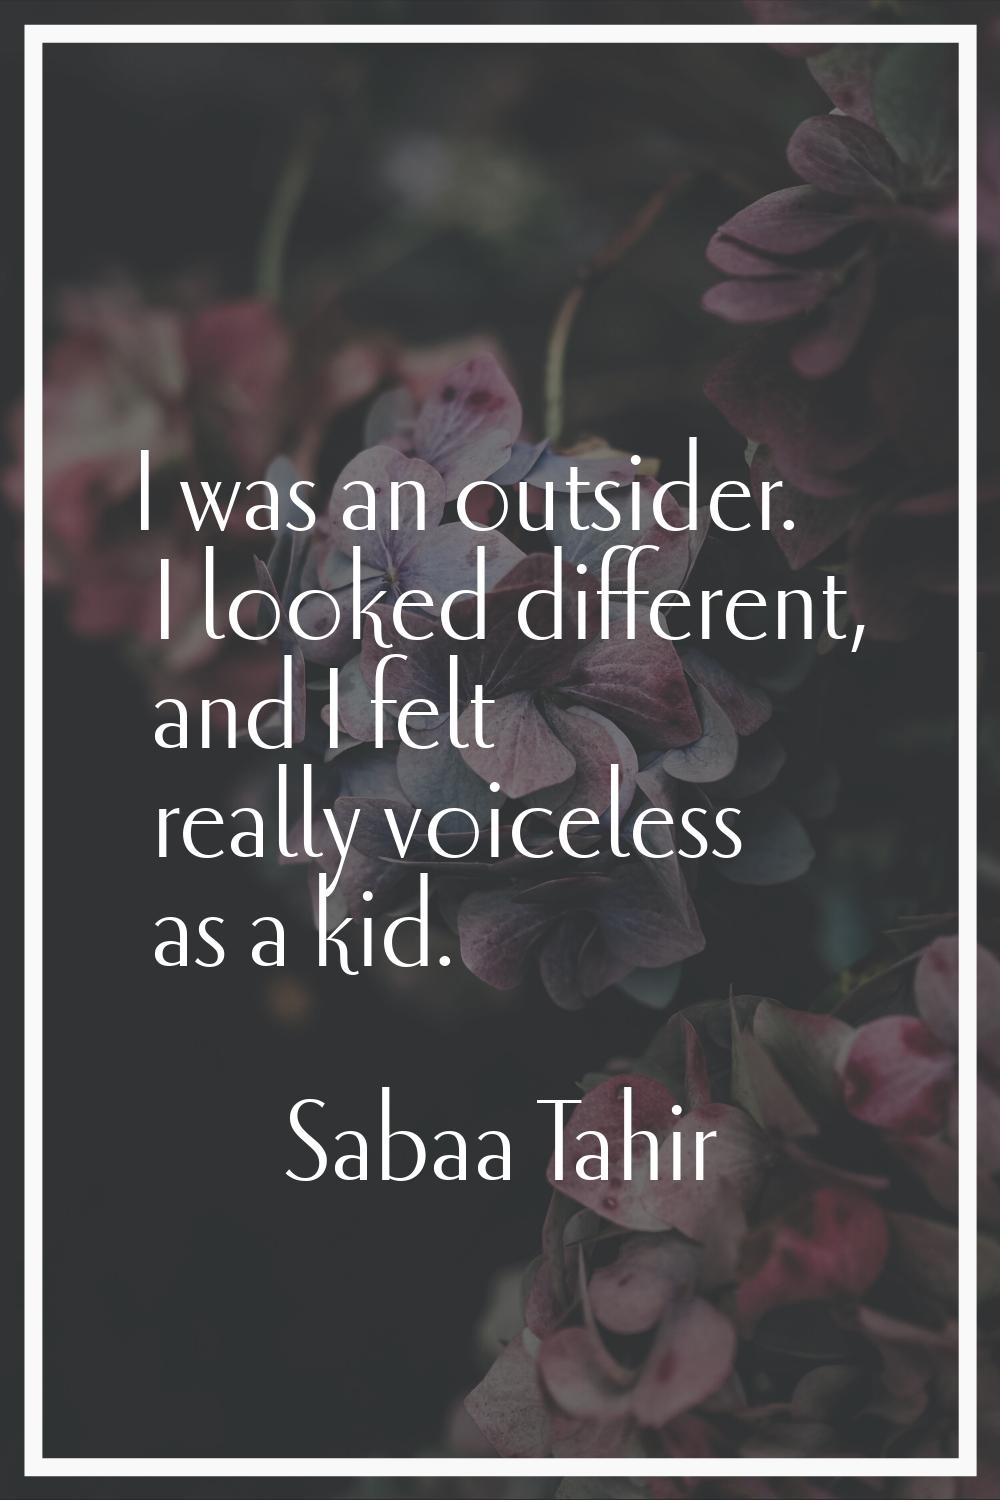 I was an outsider. I looked different, and I felt really voiceless as a kid.